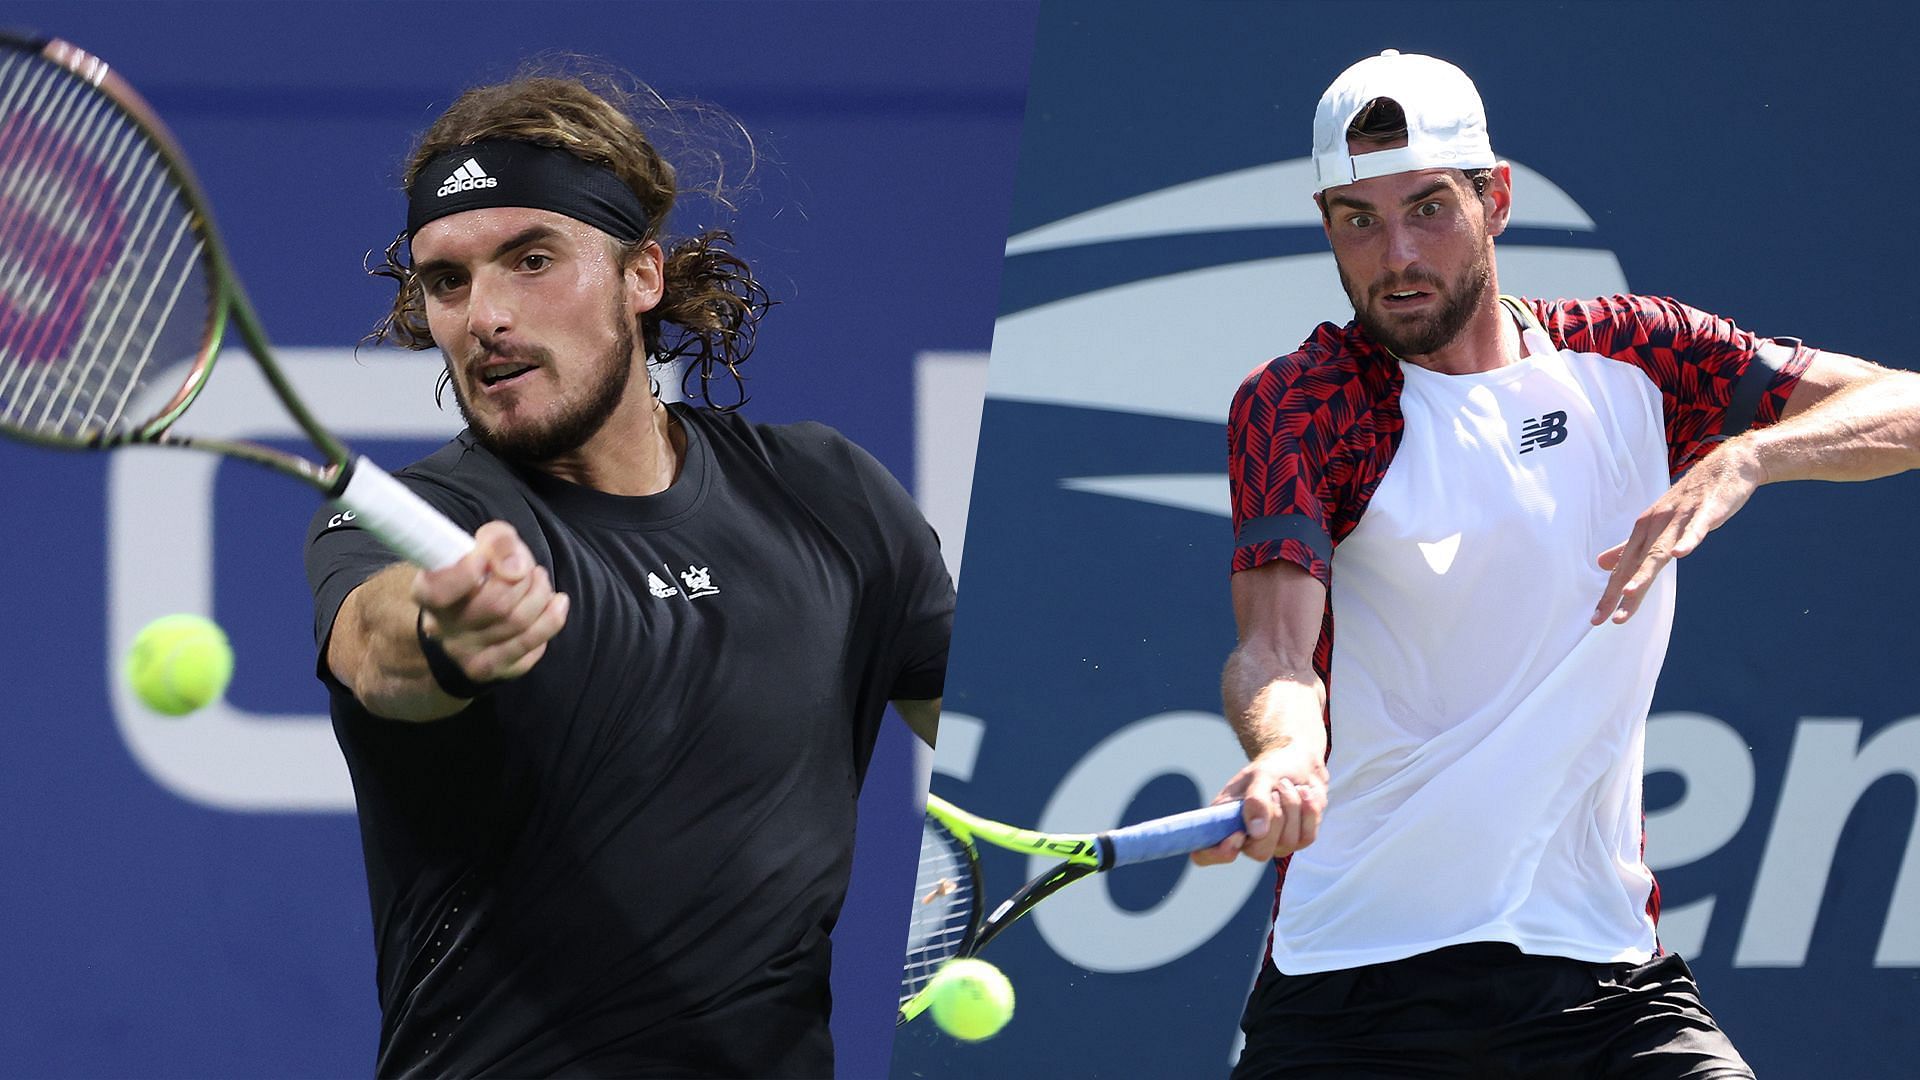 Stockholm Open 2022 Stefanos Tsitsipas vs Maxime Cressy preview, head-to-head, prediction, odds and pick